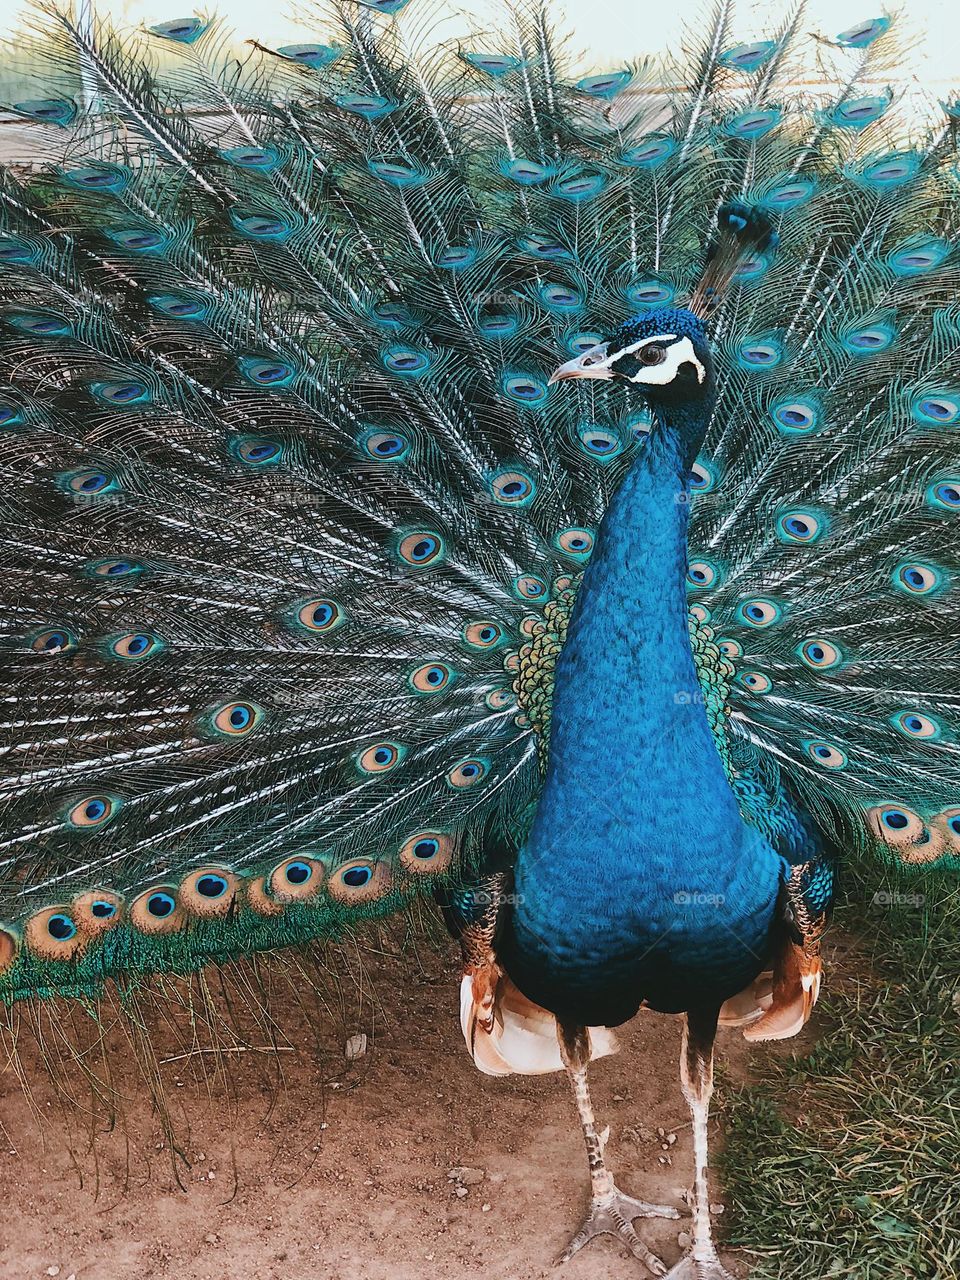 Peacock with an open tail